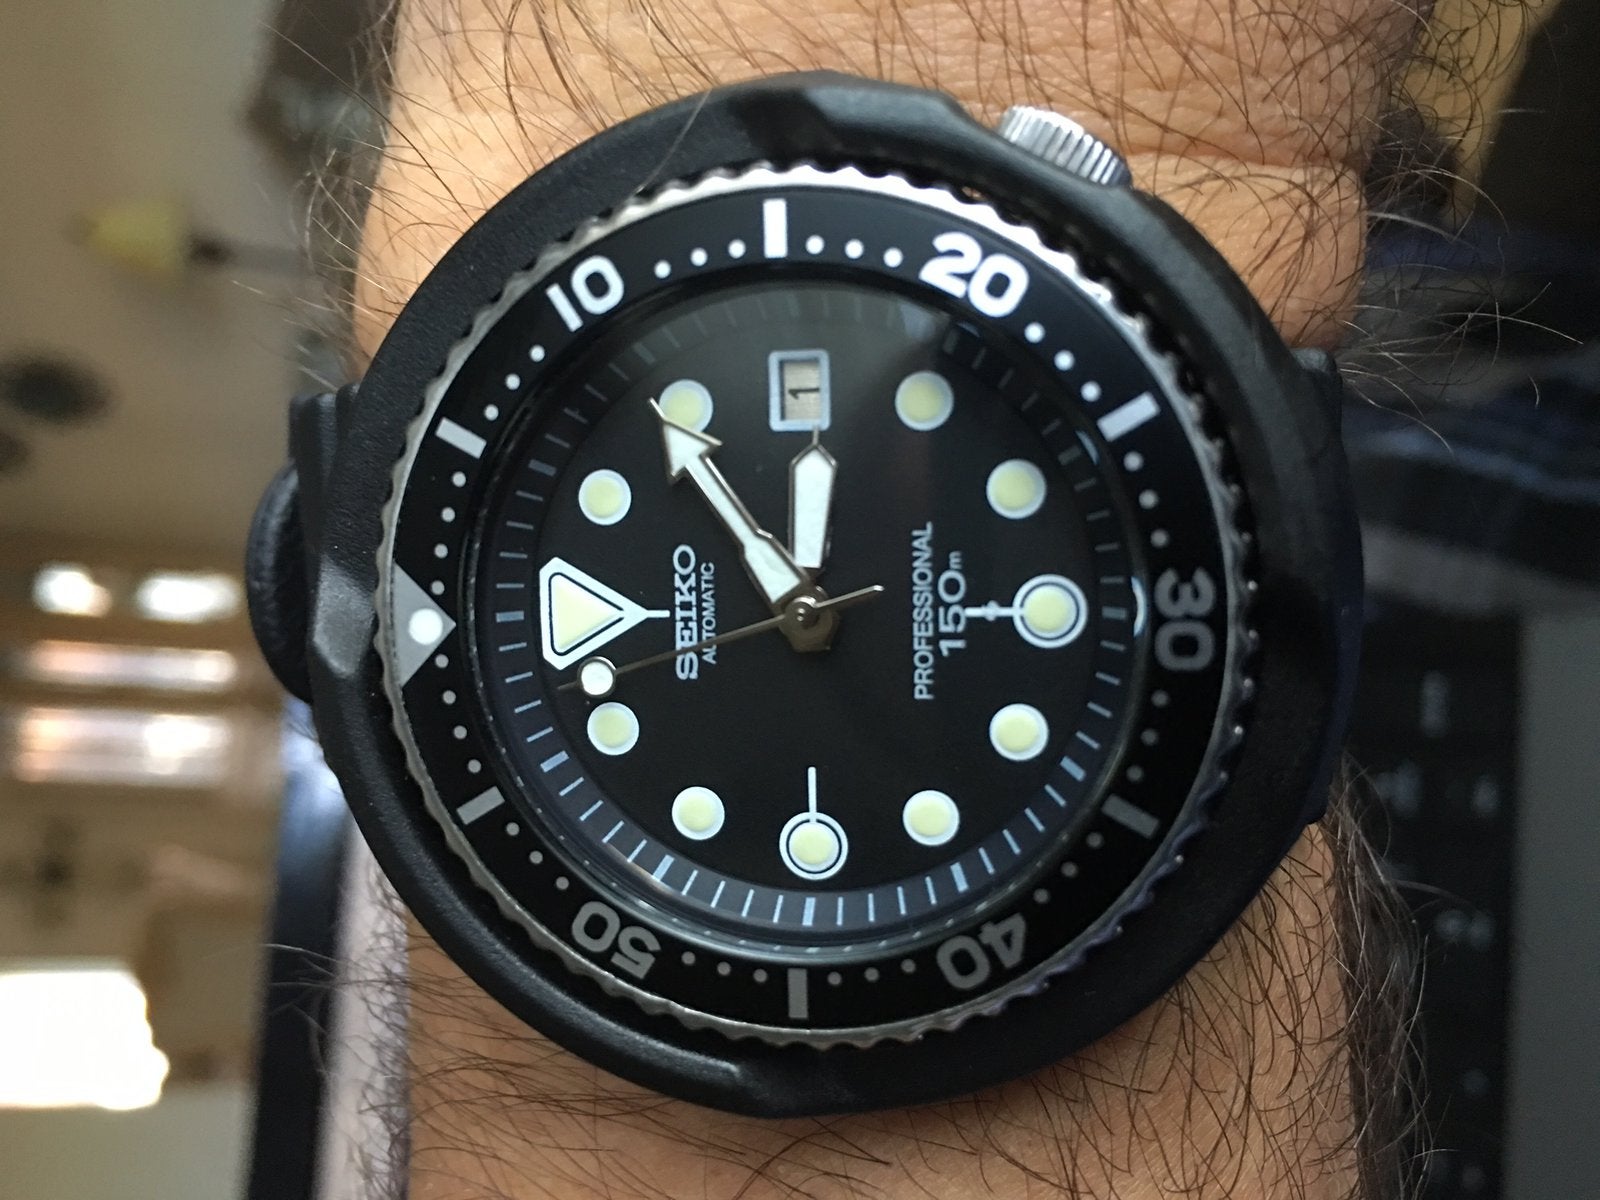 7002-7001 Mods | The Watch Site